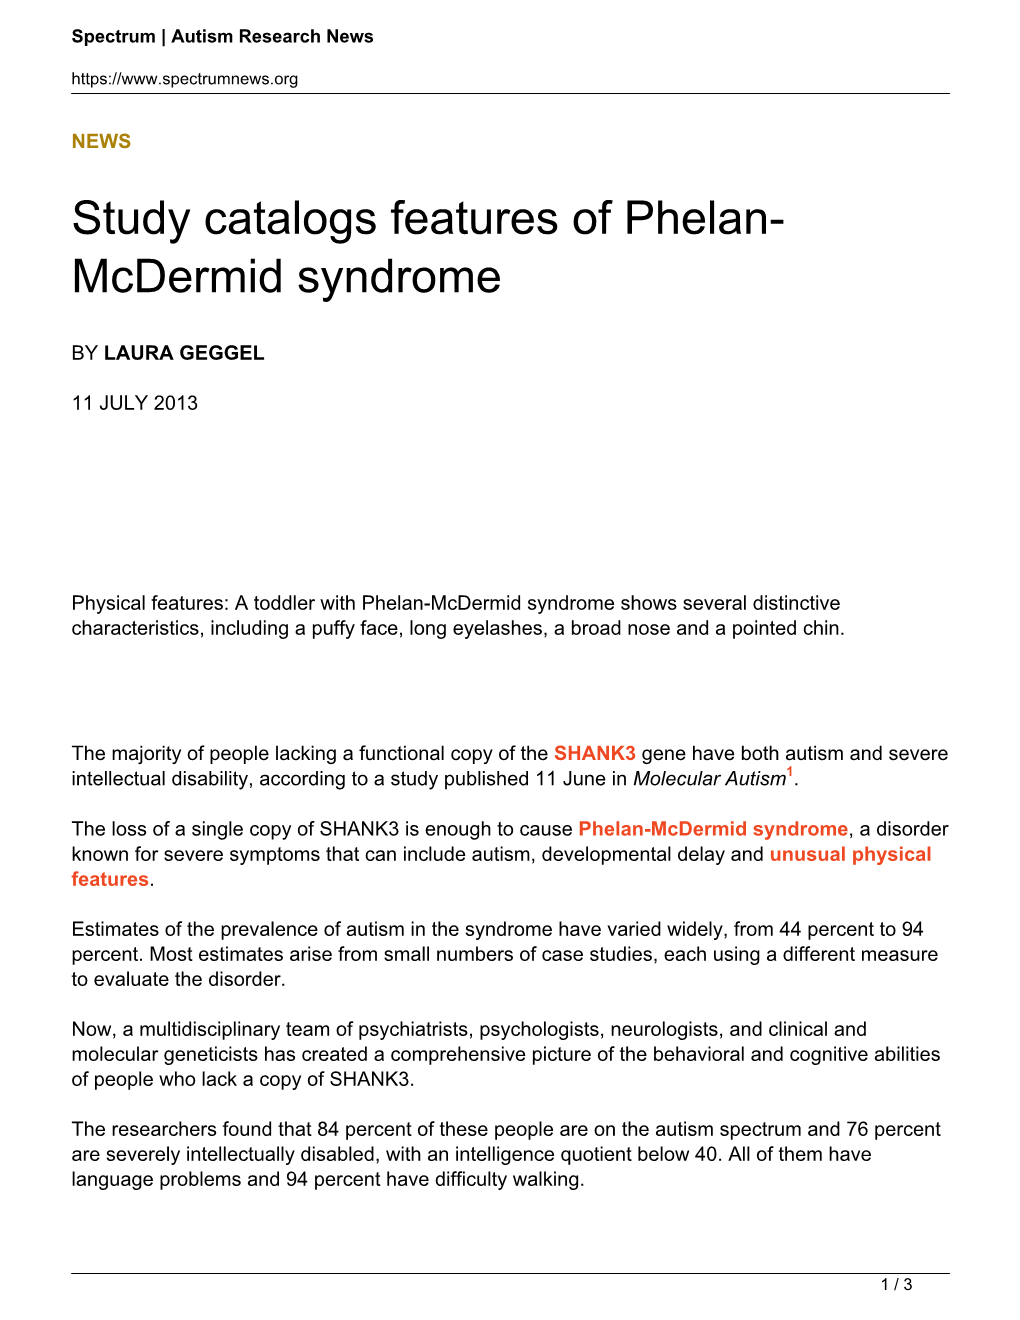 Study Catalogs Features of Phelan-Mcdermid Syndrome